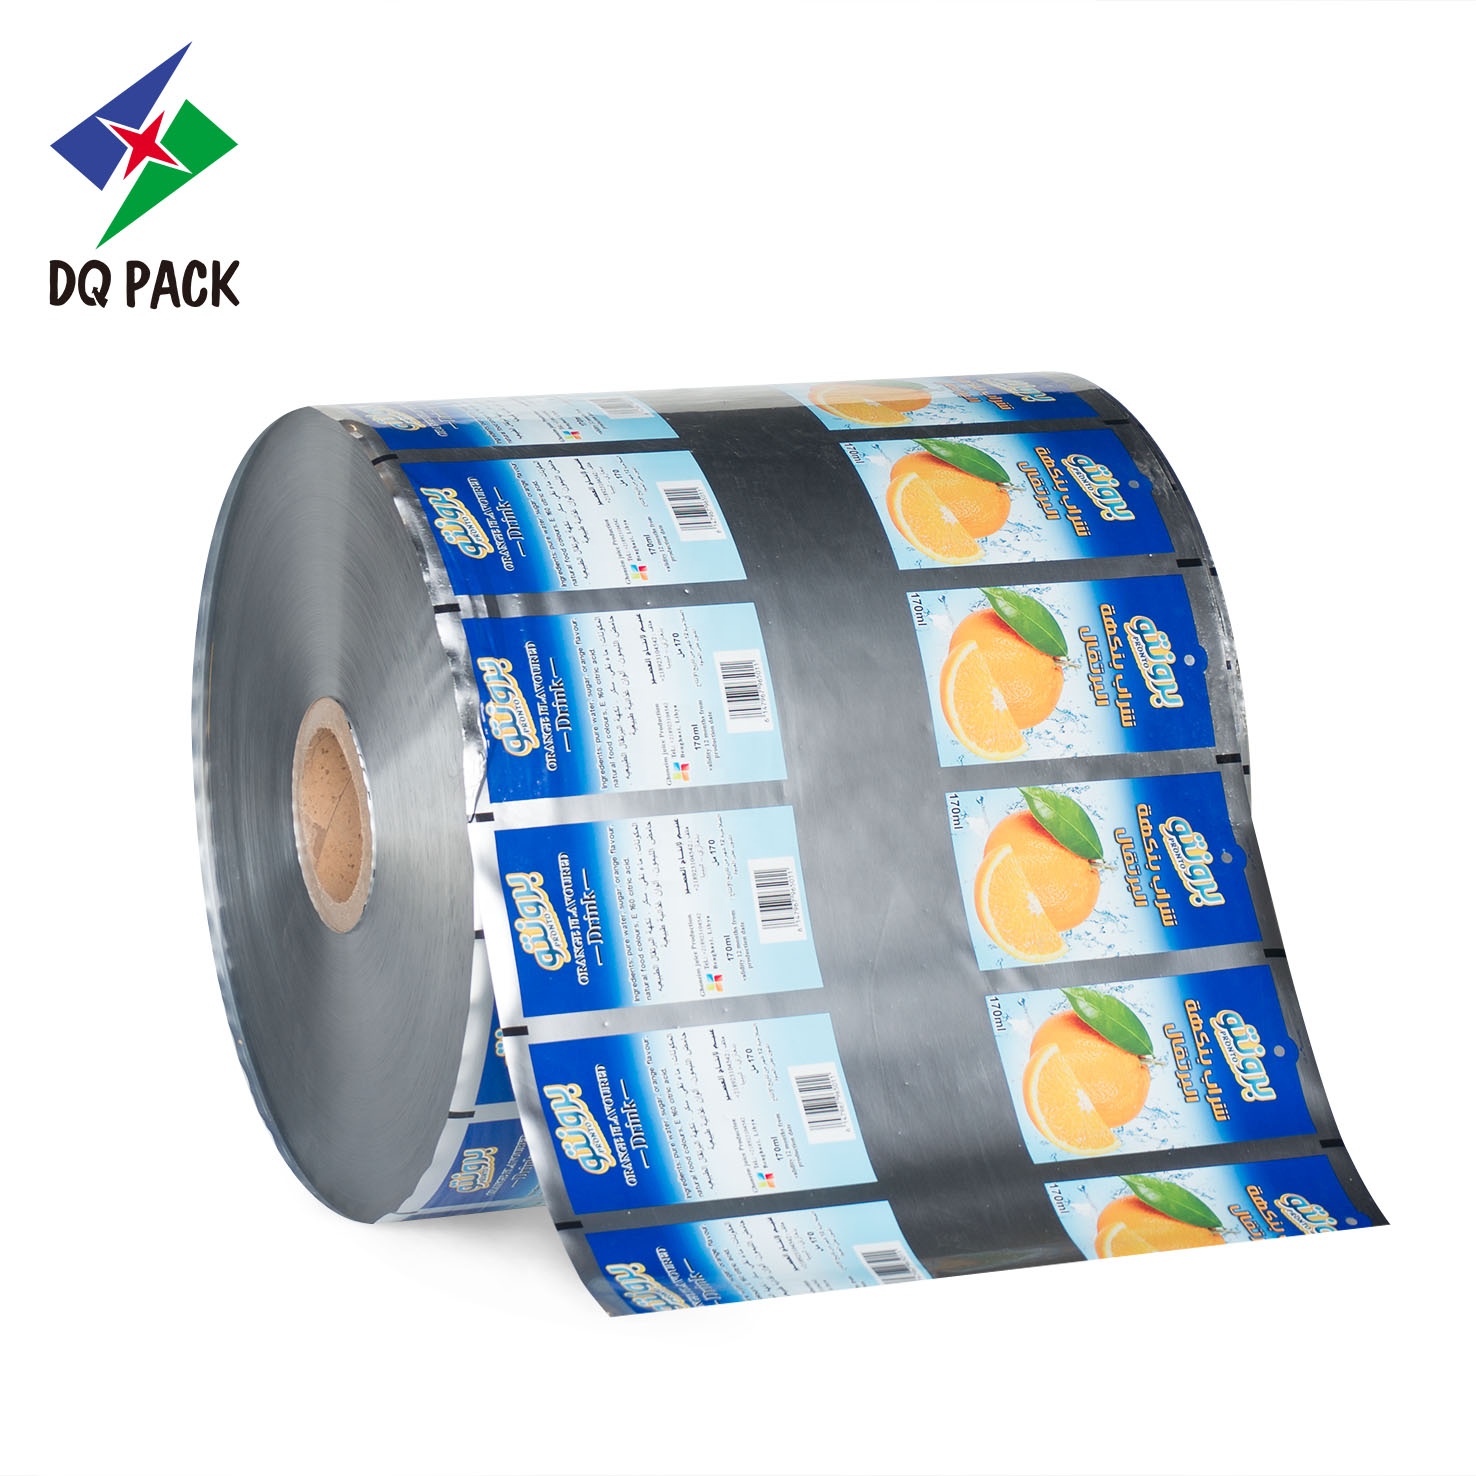 DQ PACK Aluminum Foil Laminated Packing Roll Plastic Film With Perforate Hole